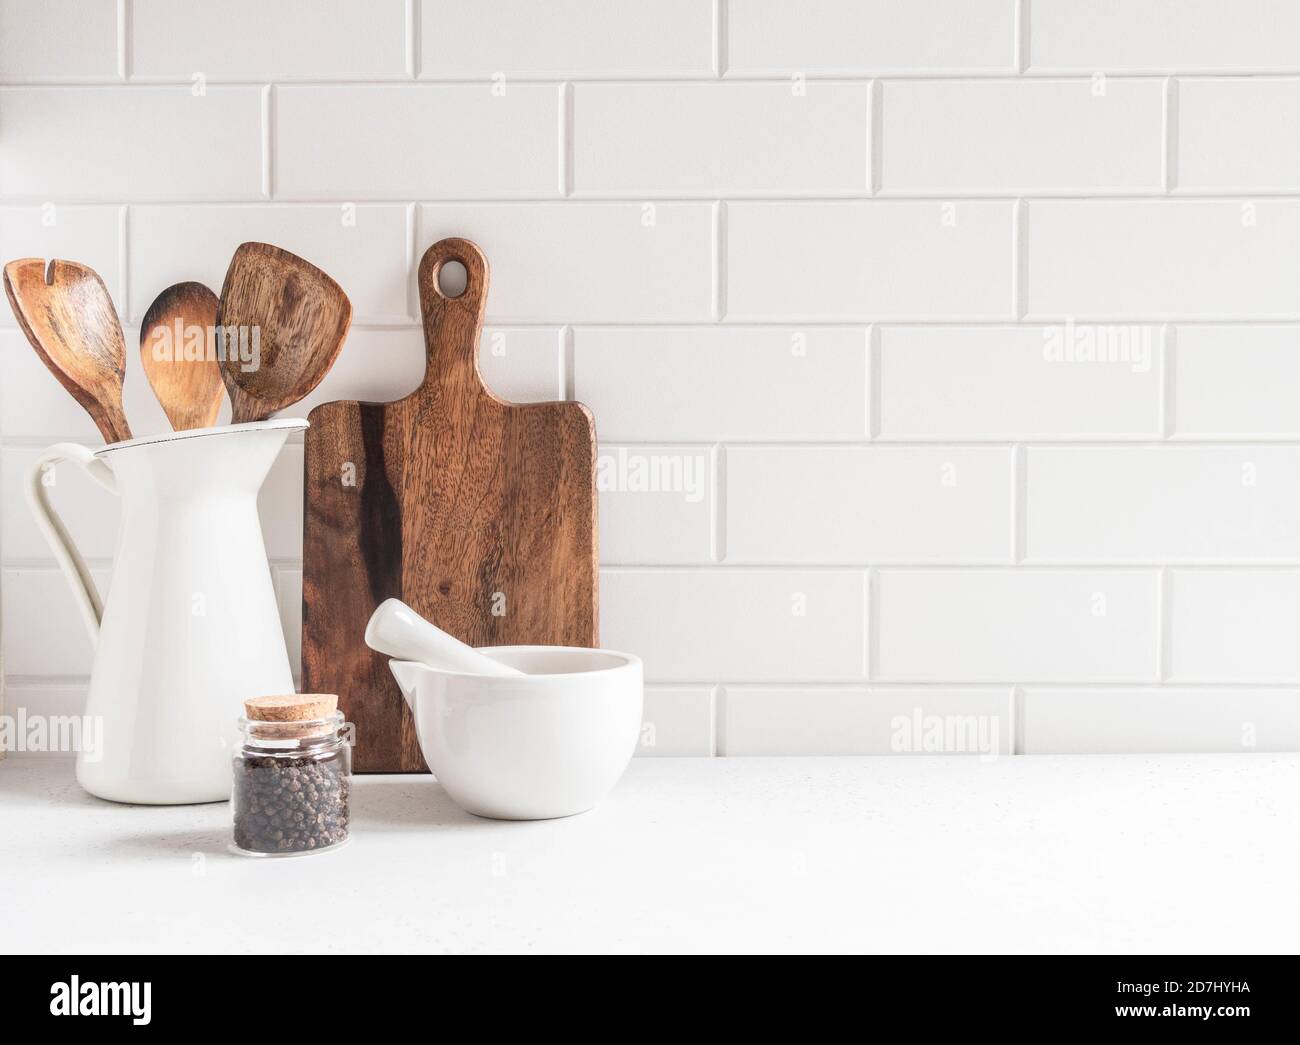 Stylish white kitchen background with kitchen utensils standing on white  countertop, empty space for text, front view Stock Photo - Alamy